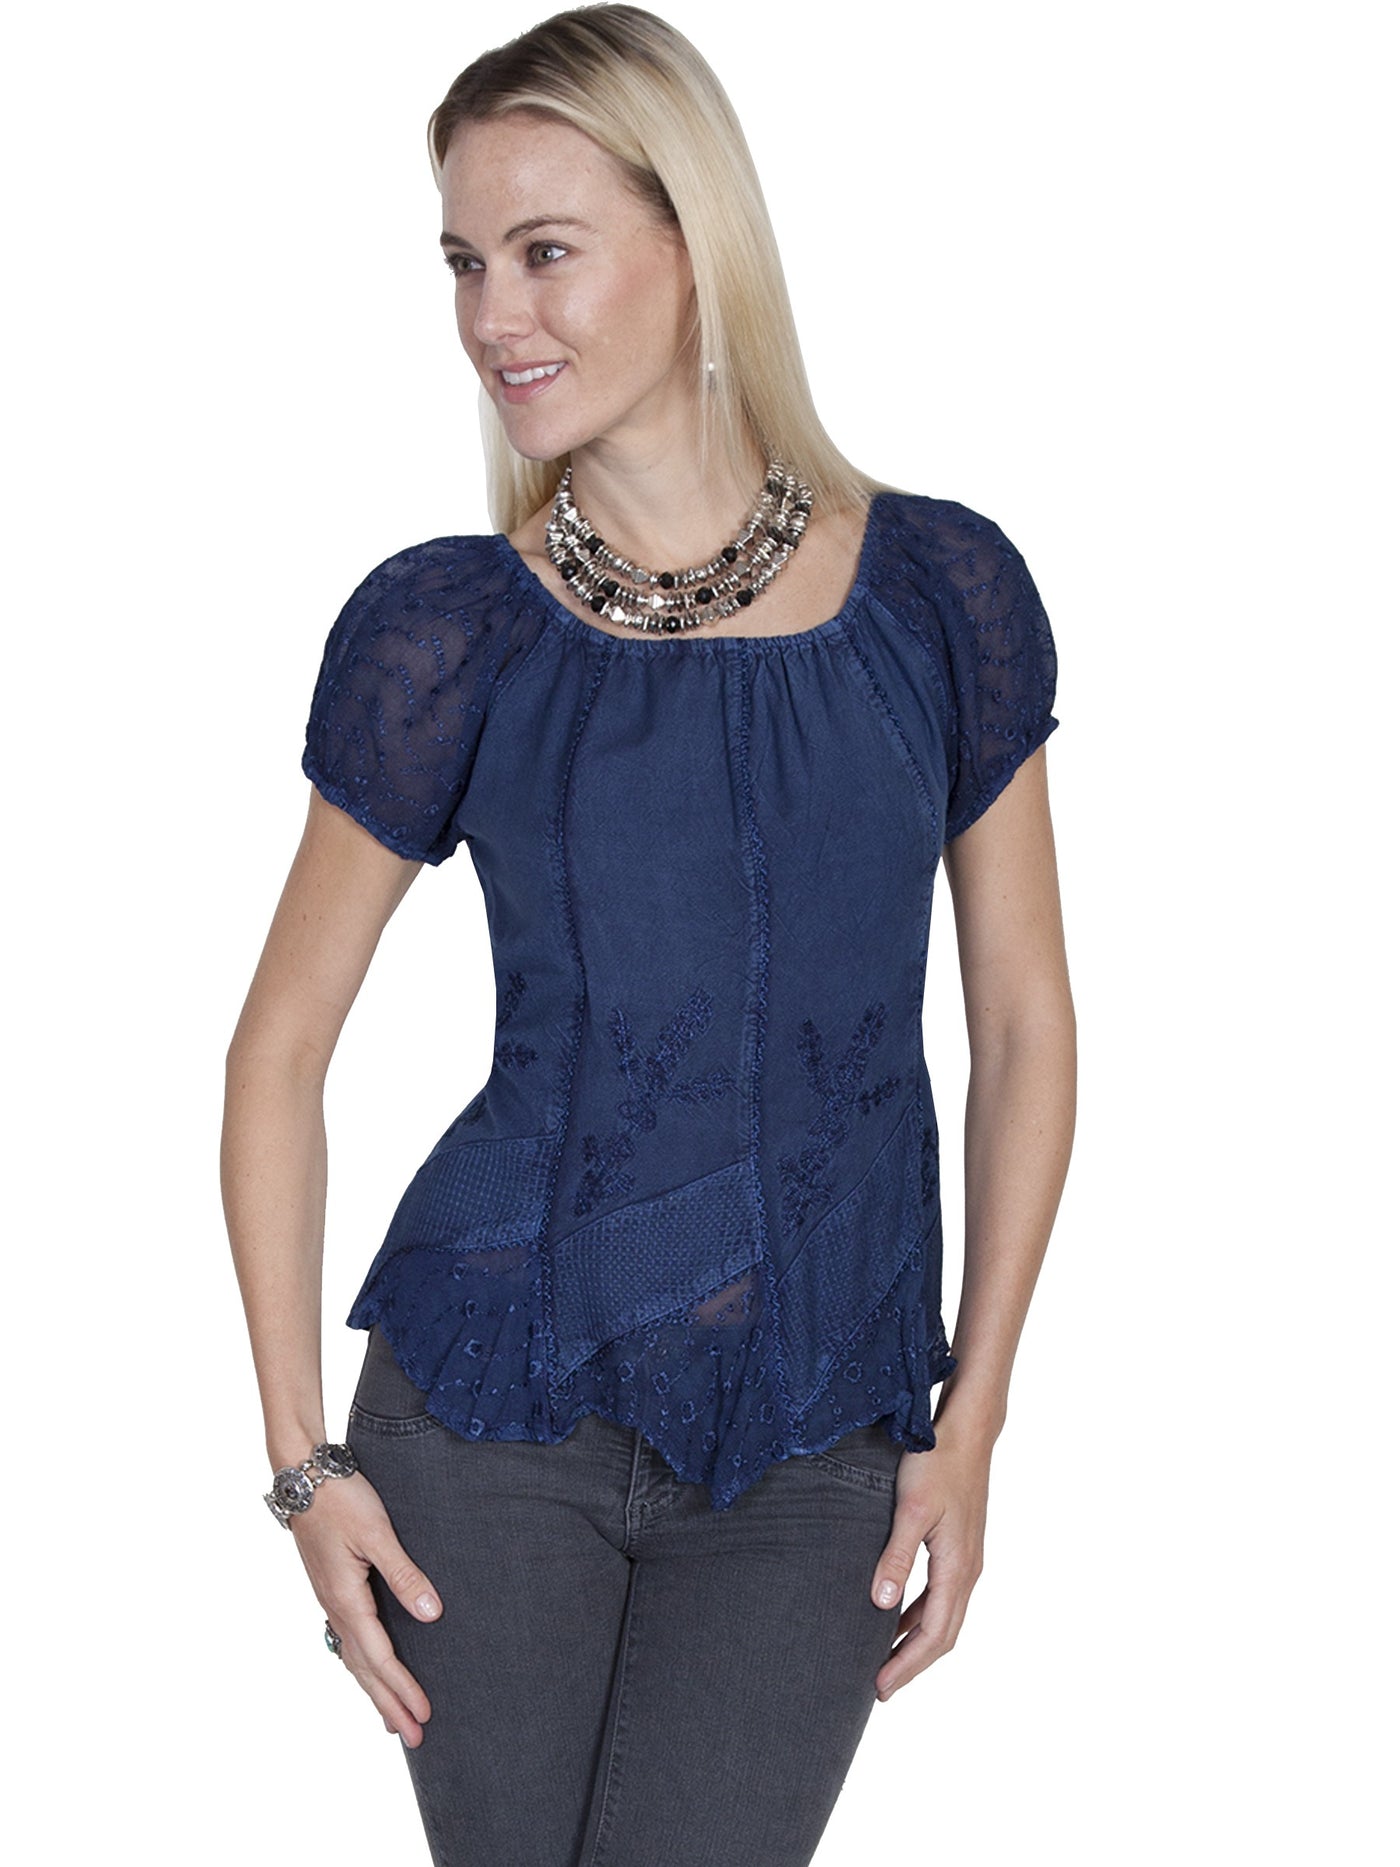 Colorado's Journey Blouse in Blue - SOLD OUT